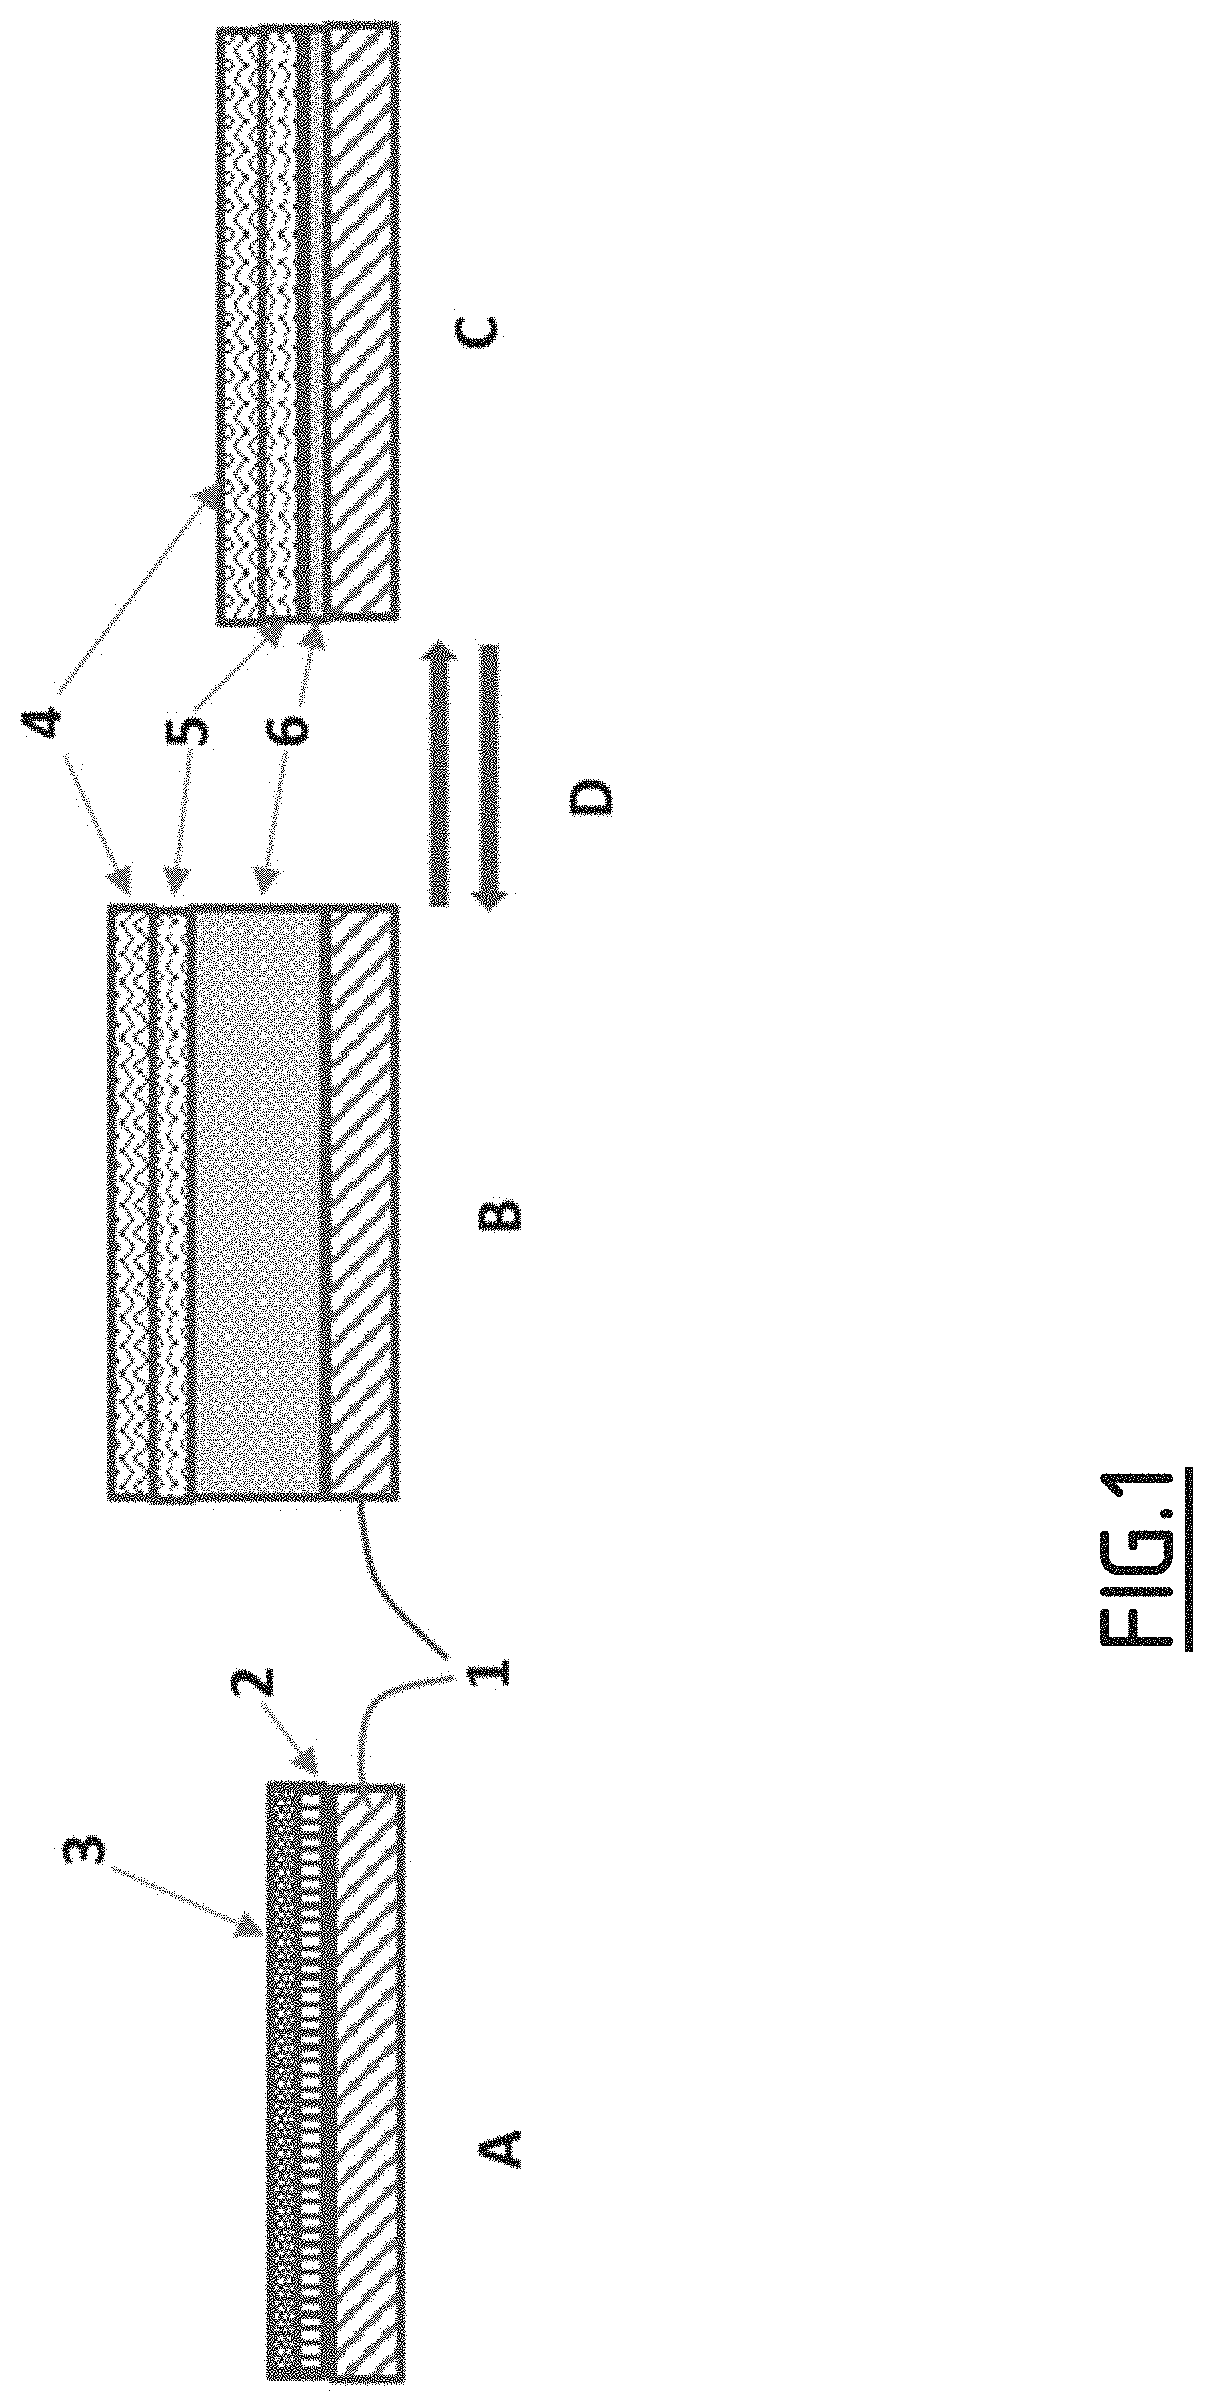 Anti-dendrite negative electrodes, and the electrochemical cells containing them